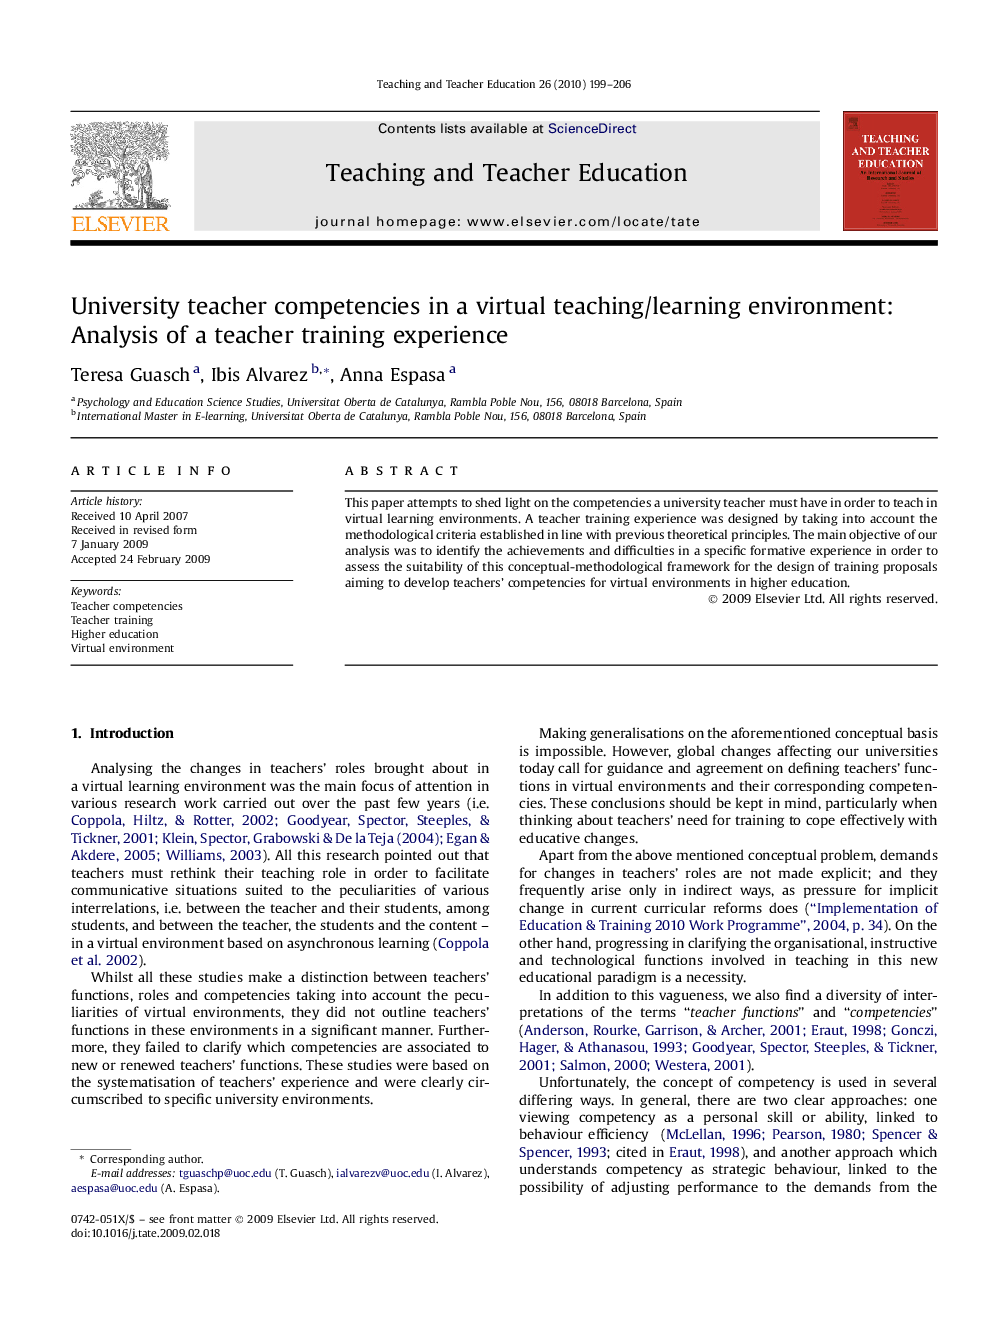 University teacher competencies in a virtual teaching/learning environment: Analysis of a teacher training experience